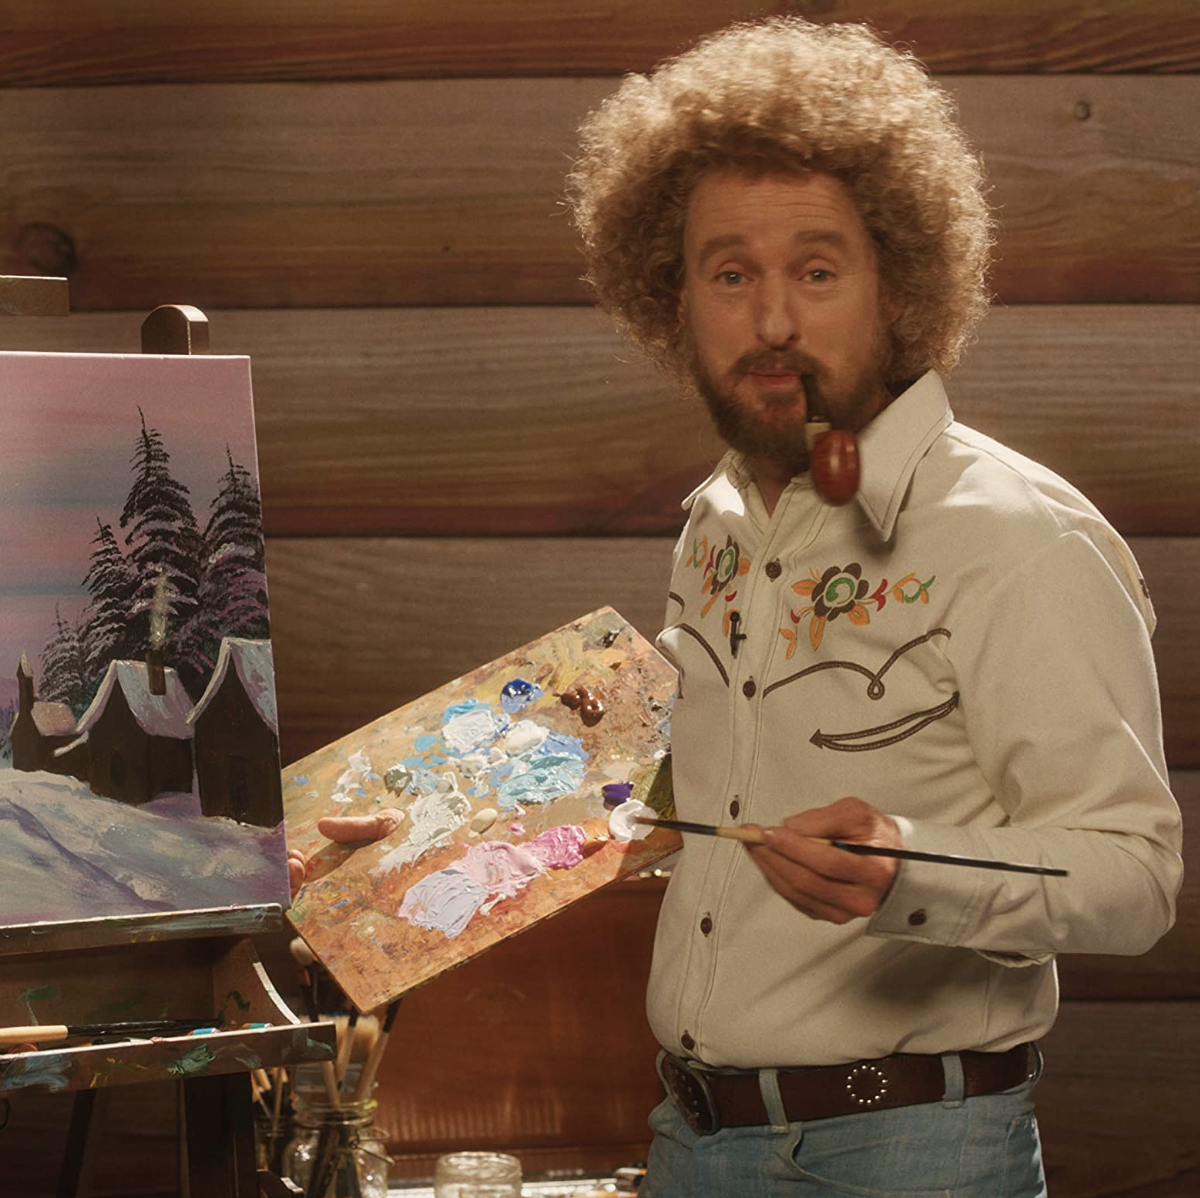 Where Was Bob Ross-Inspired 'Paint' Movie Filmed? - Filming Locations